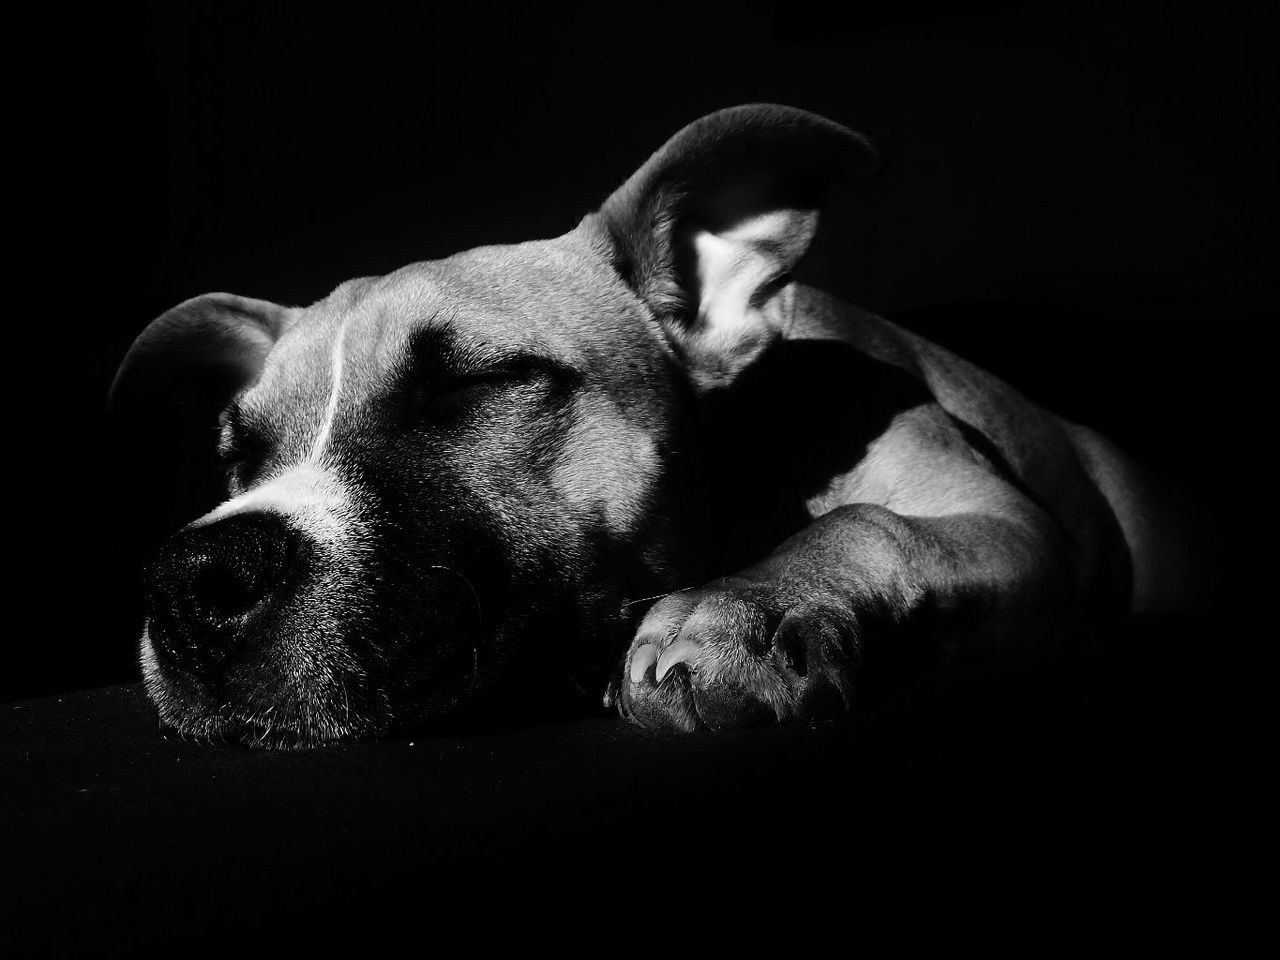 CLOSE-UP OF DOG RELAXING ON BLACK